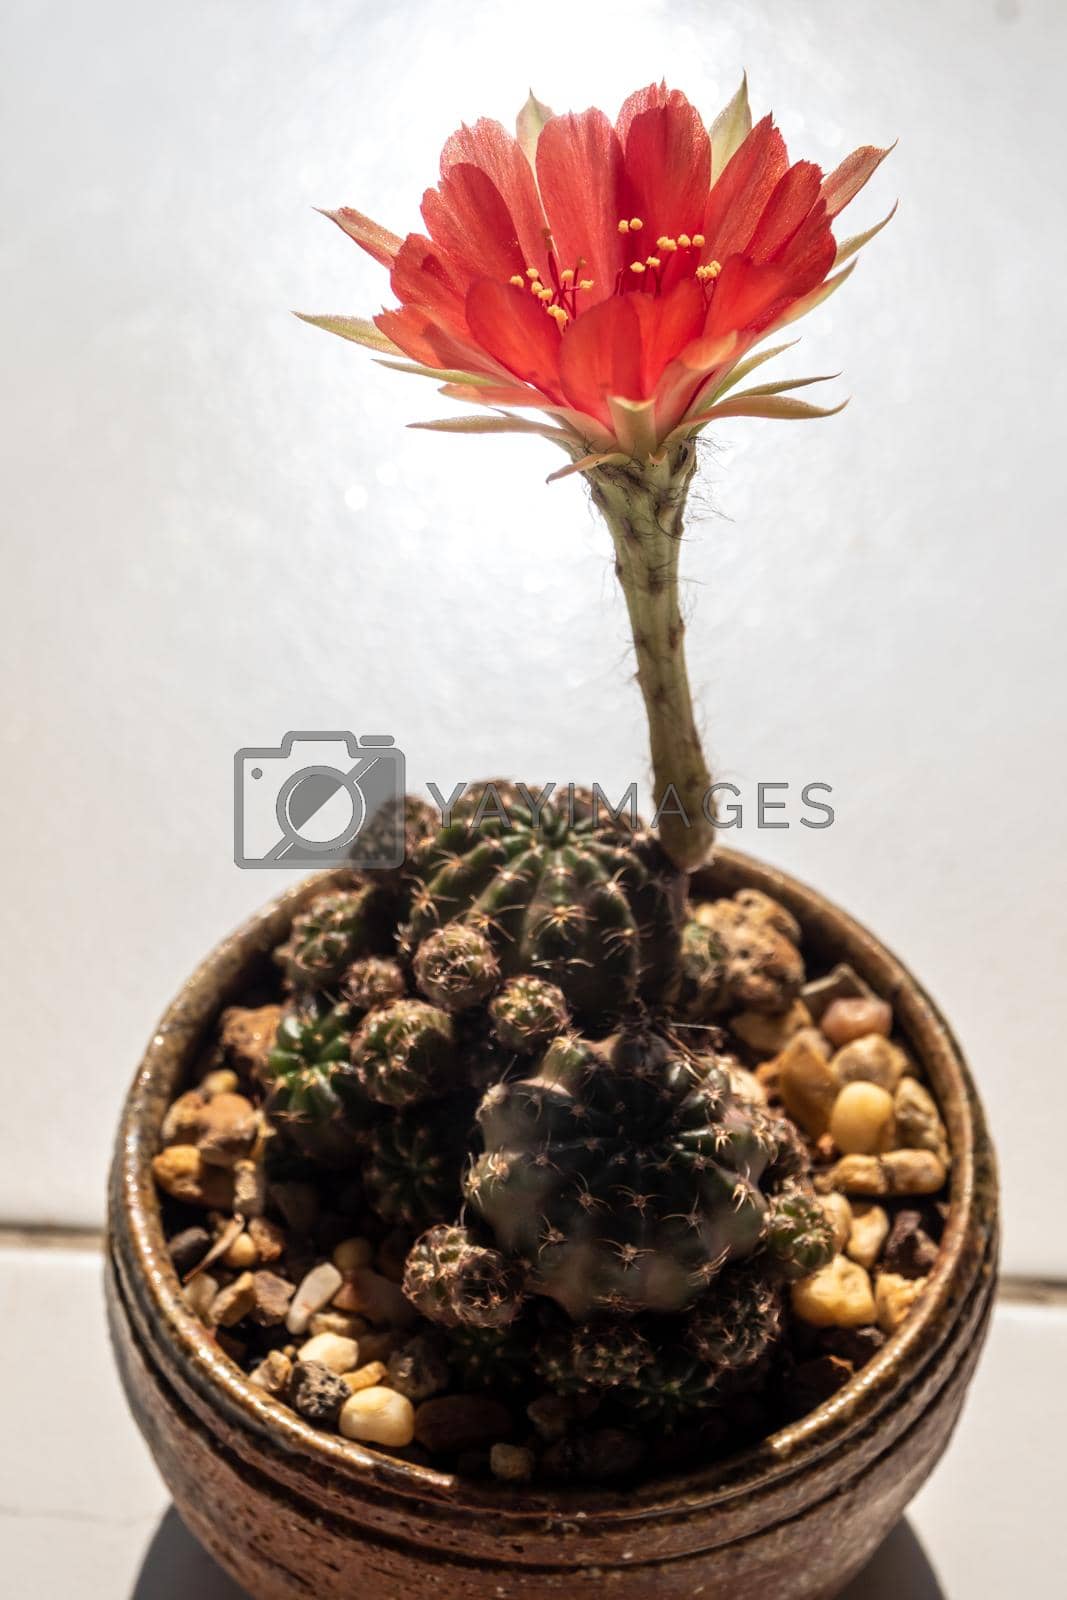 Royalty free image of Red color delicate petal with fluffy hairy of Echinopsis Cactus flower by Satakorn